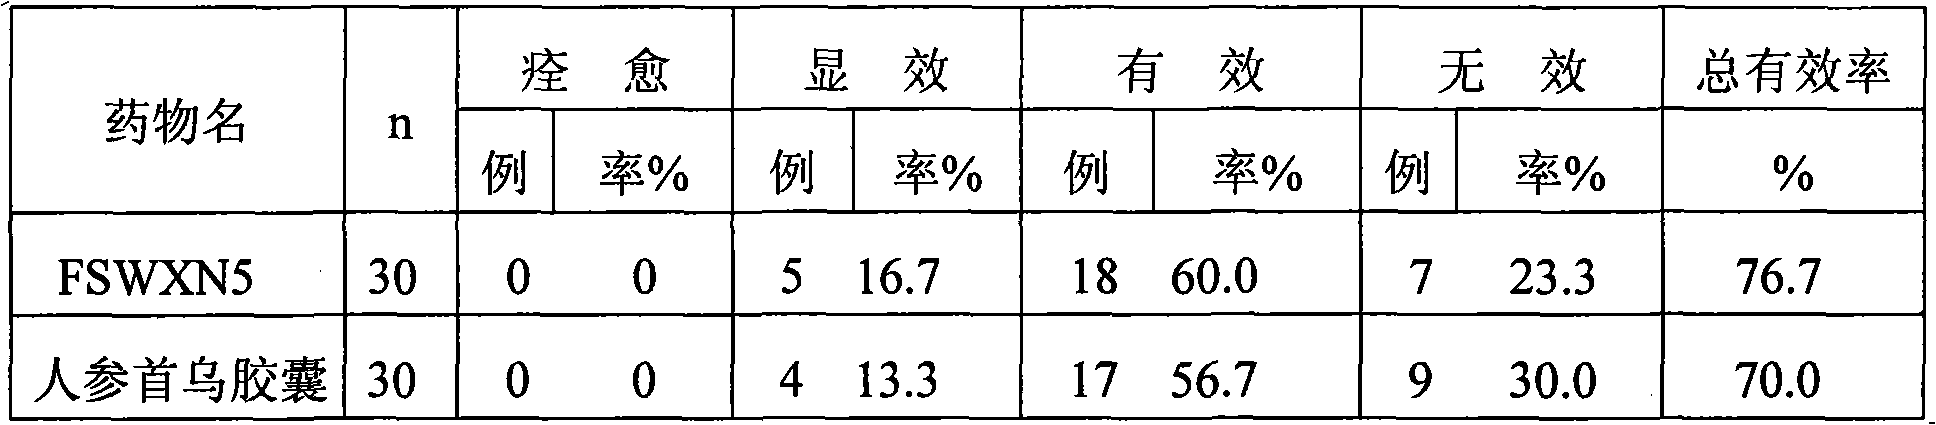 Composition of traditional Chinese medicine effective constituent for preventing and treating diseased associated with cerebral ischemia injury